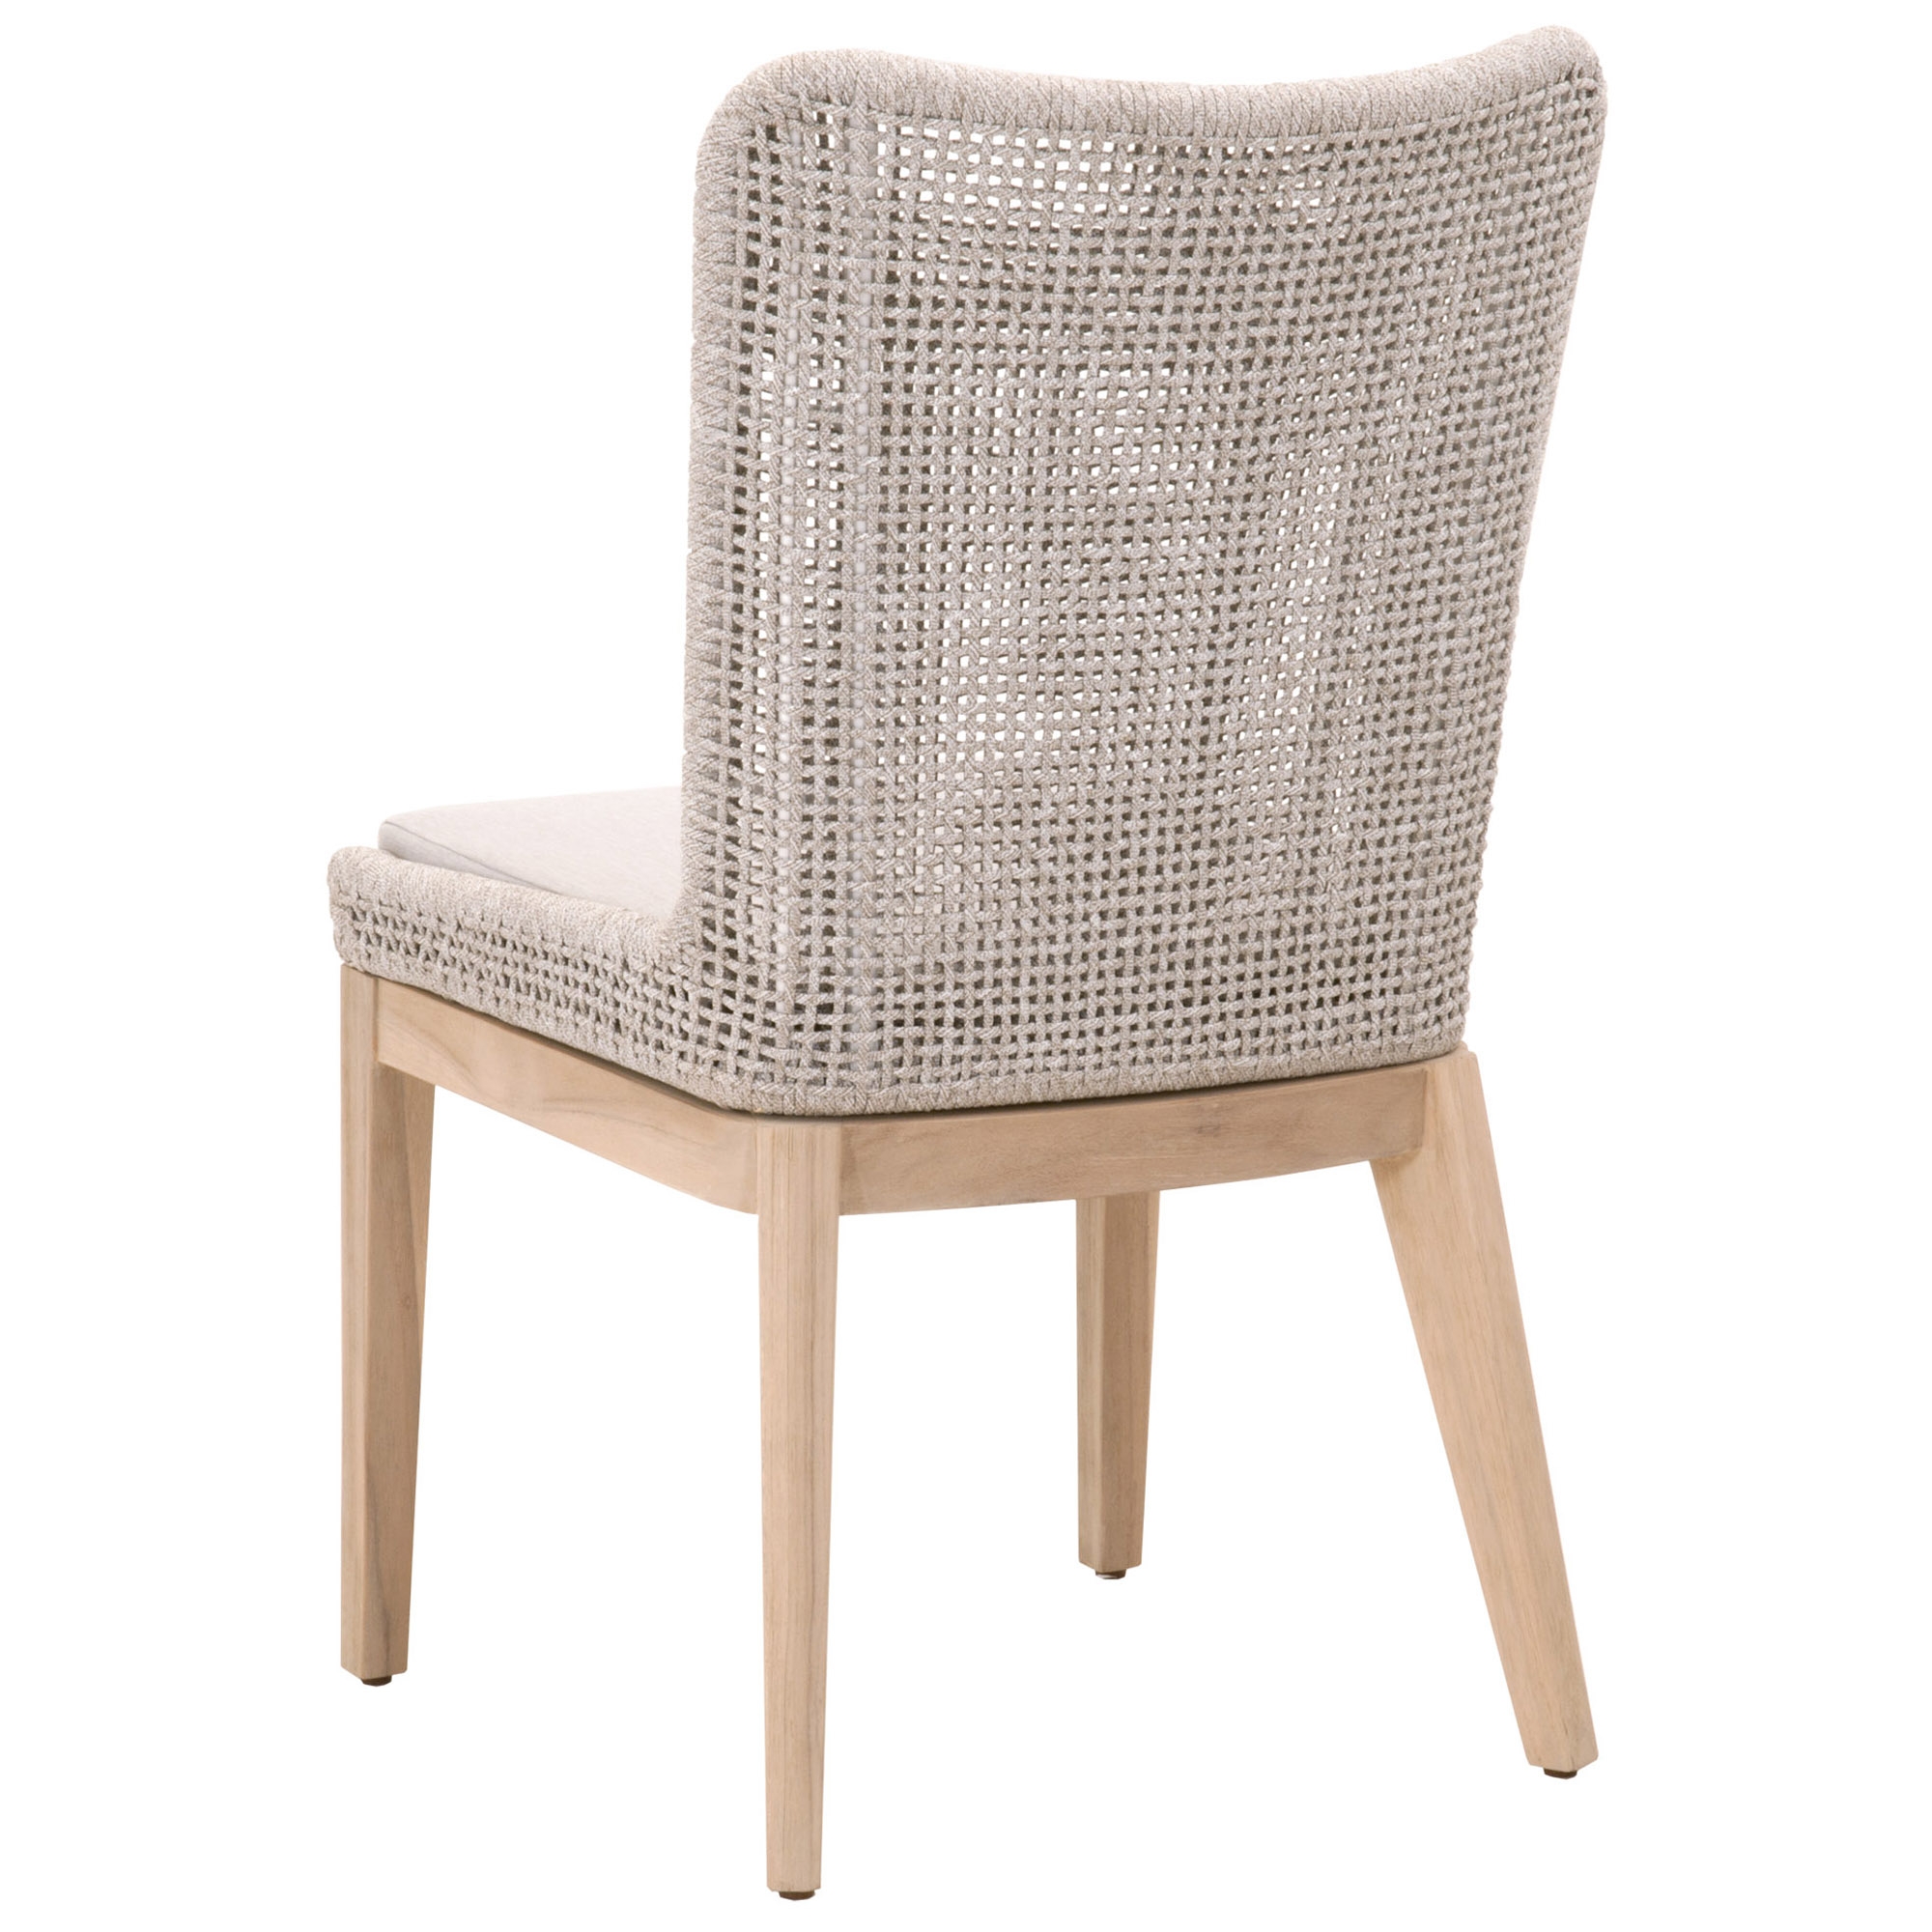 Mesh Outdoor Dining Chair, Gray, Set of 2 - Image 3